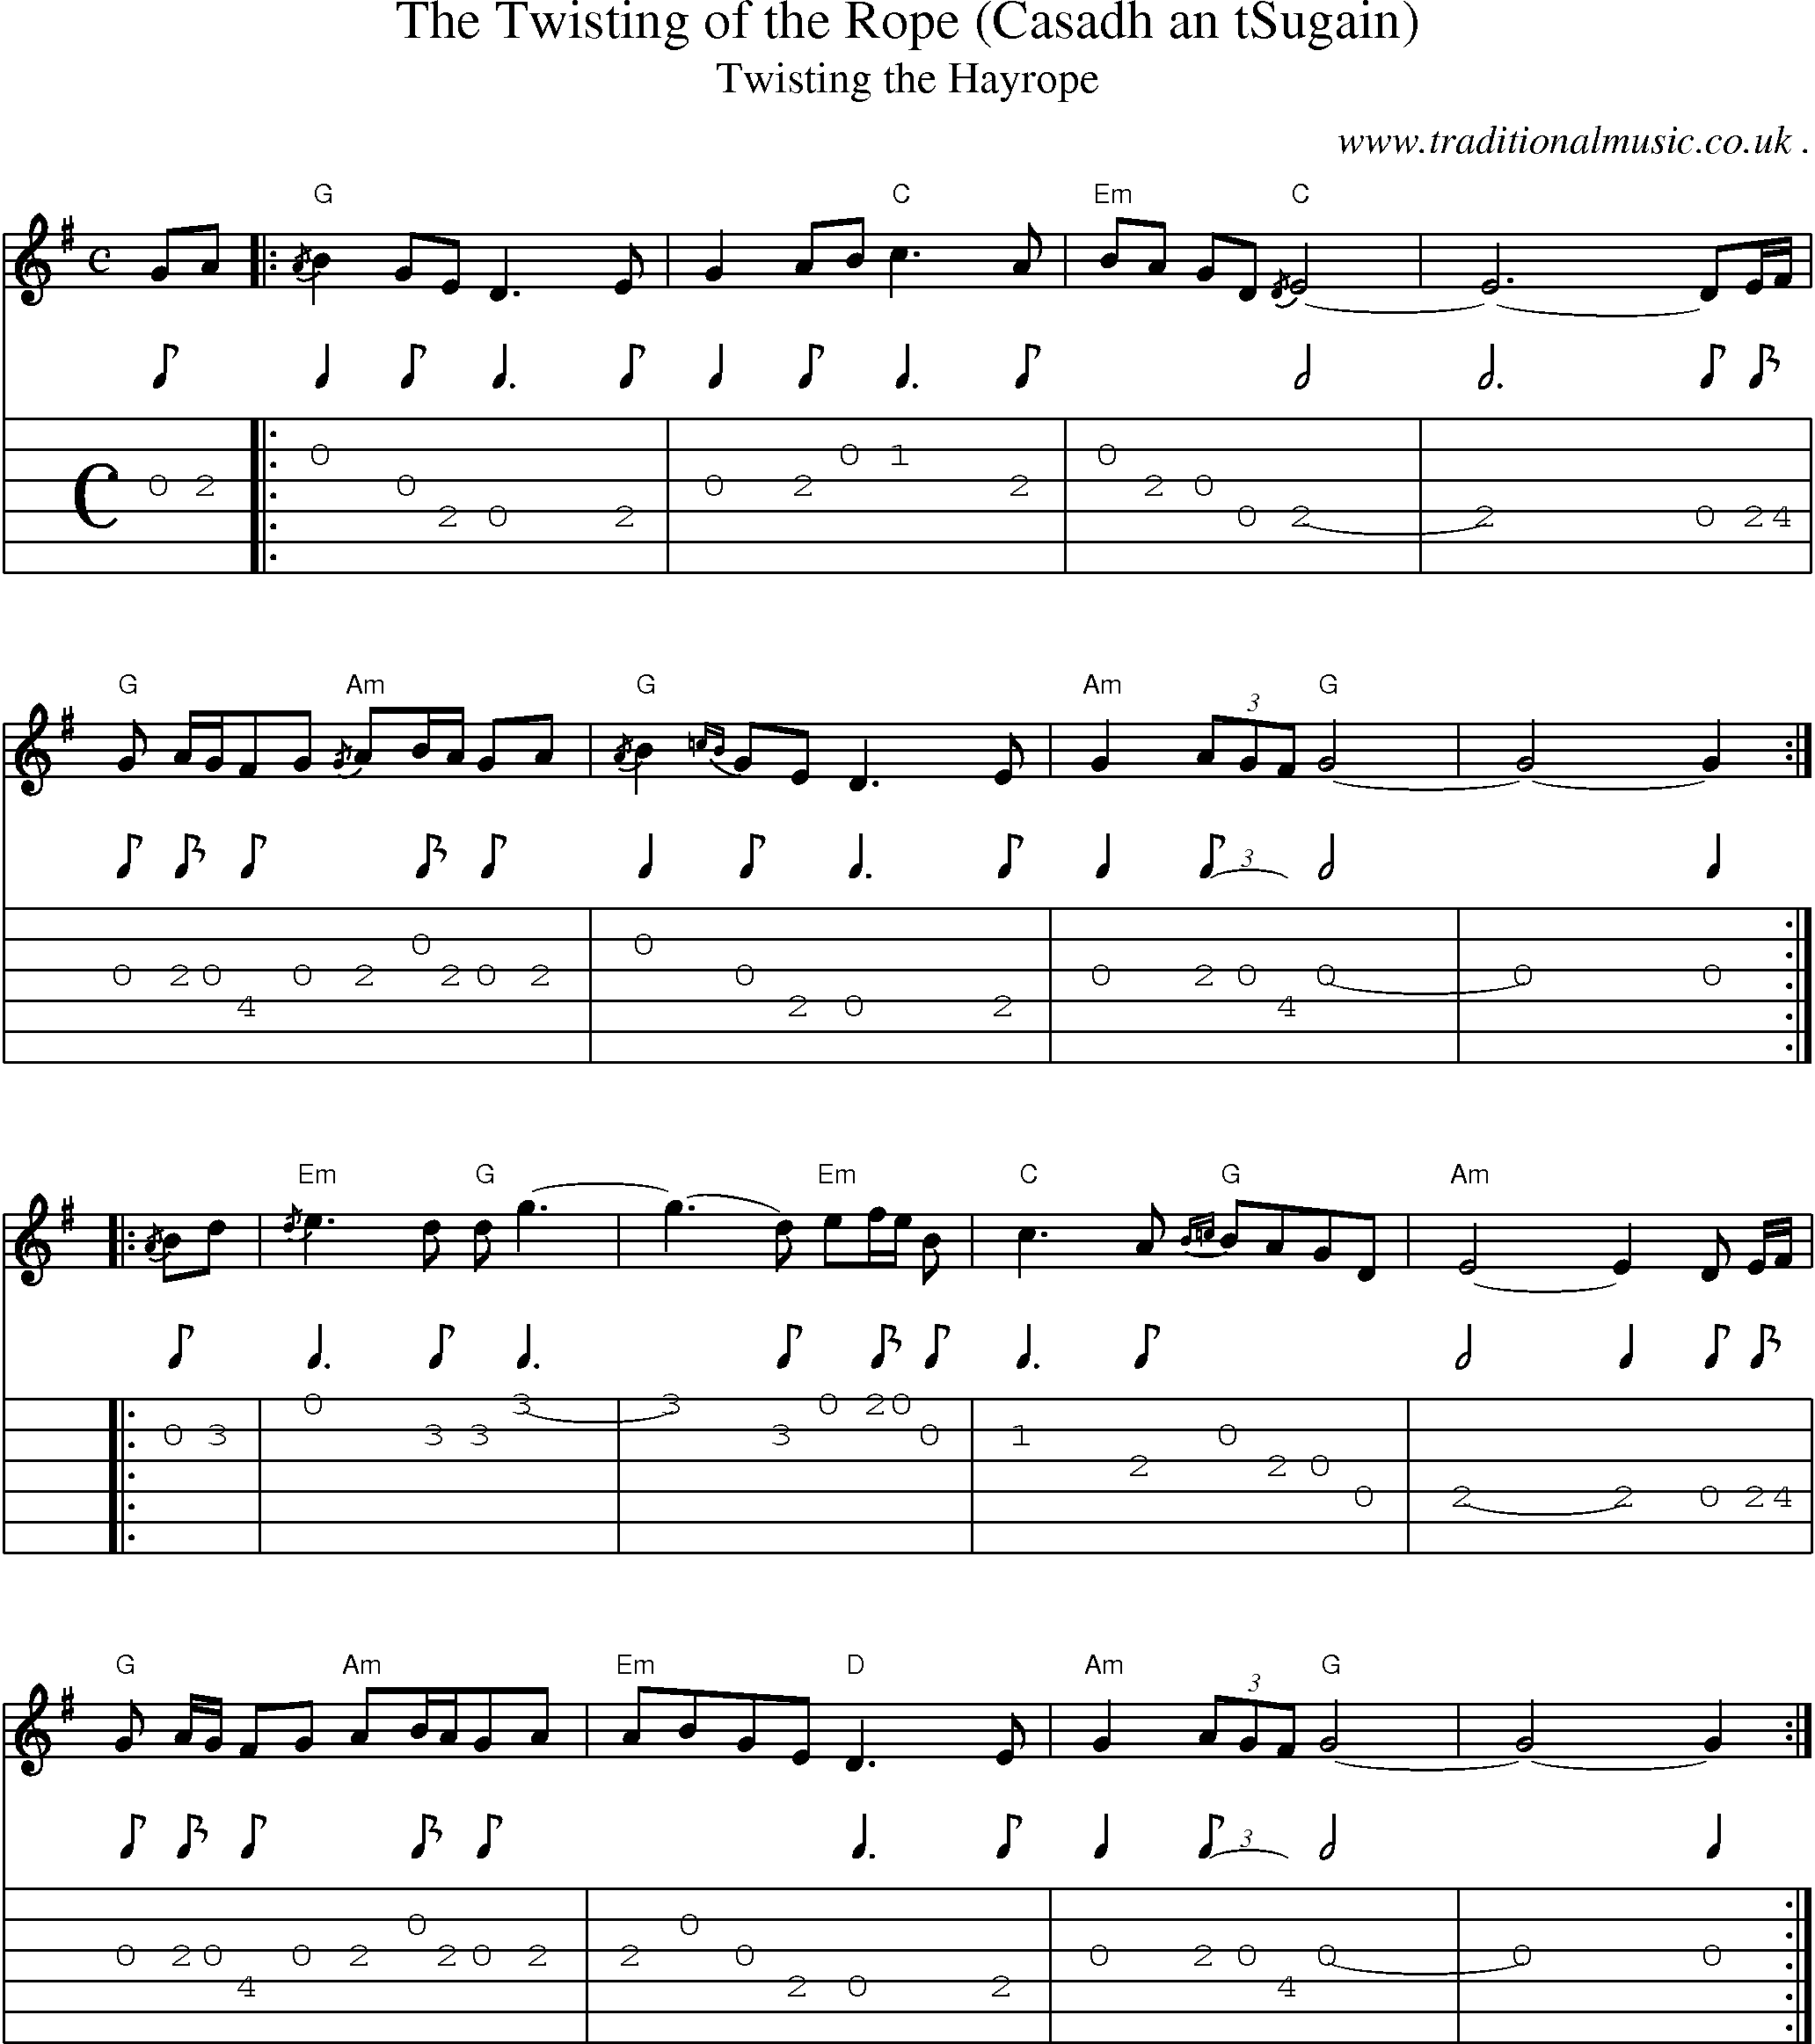 Sheet-music  score, Chords and Guitar Tabs for The Twisting Of The Rope Casadh An Tsugain